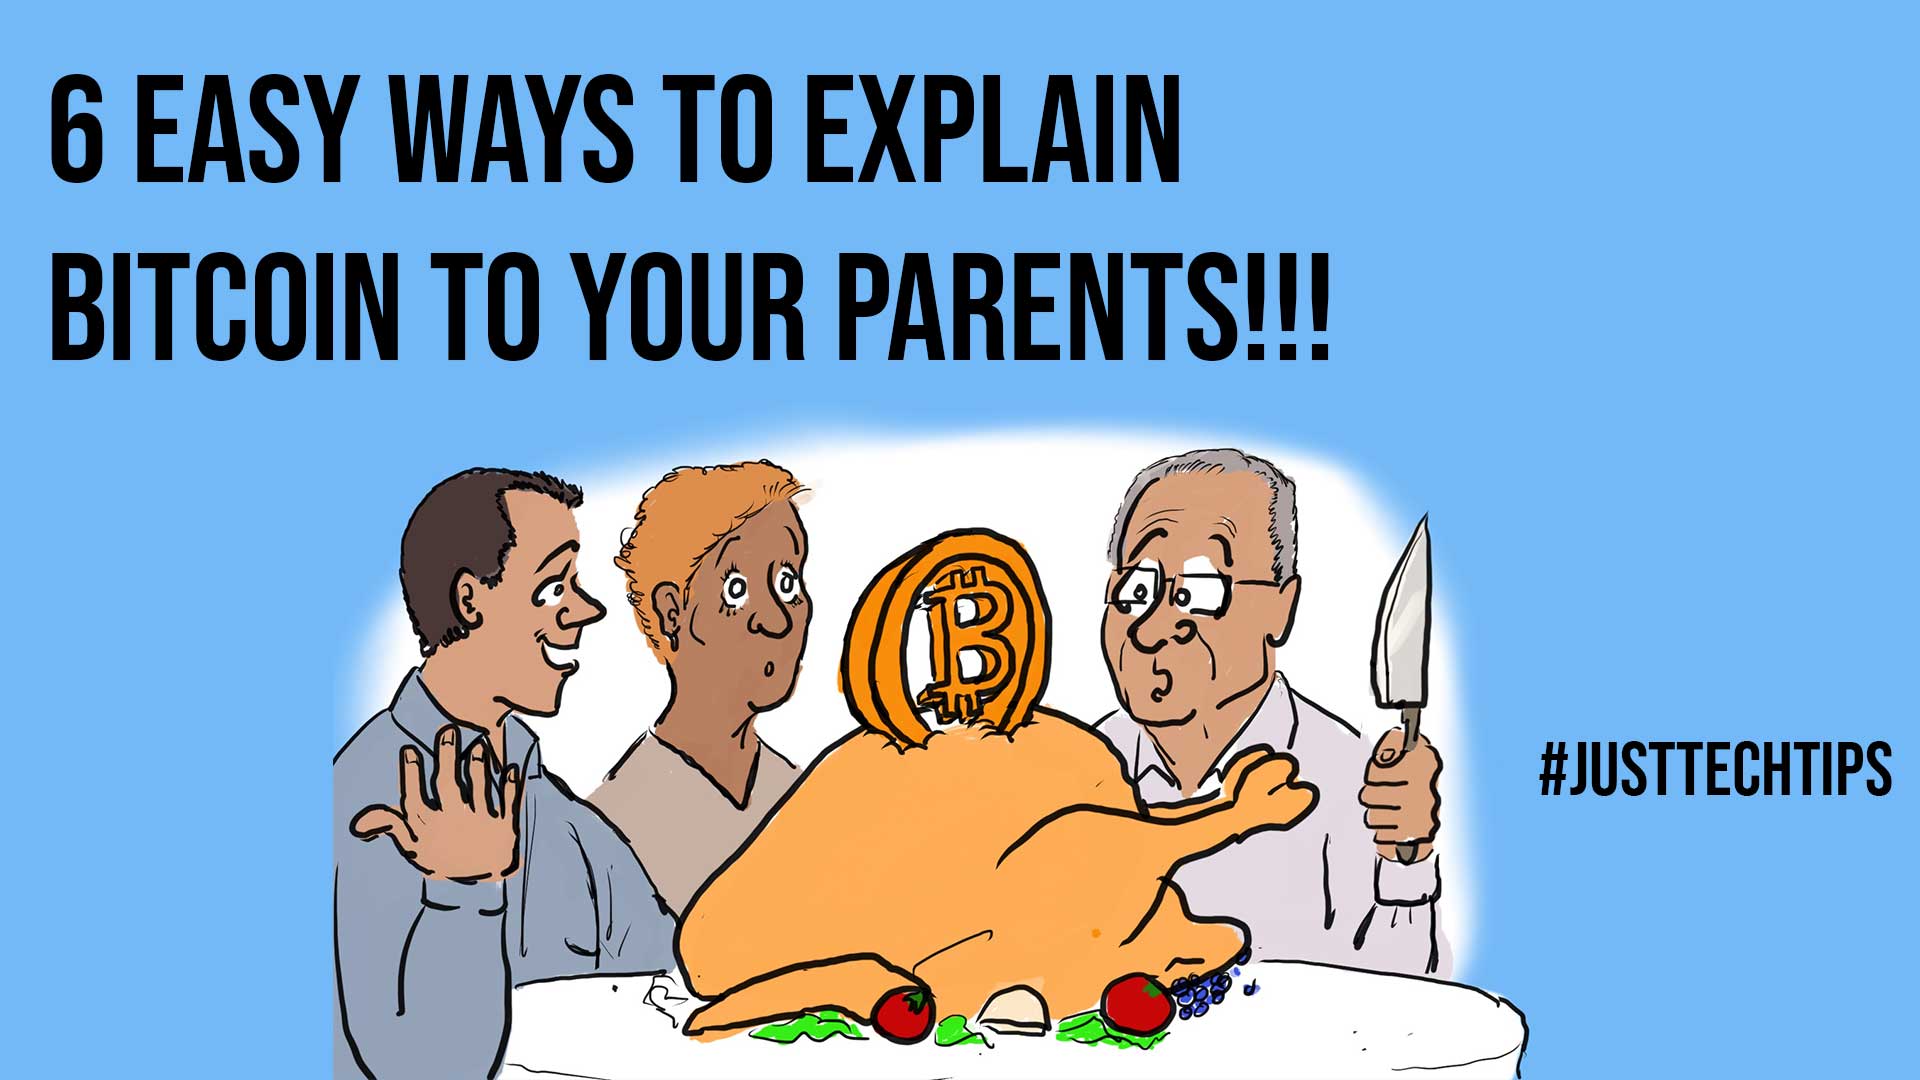 6 Easy Ways to Explain Bitcoin to Your Parents